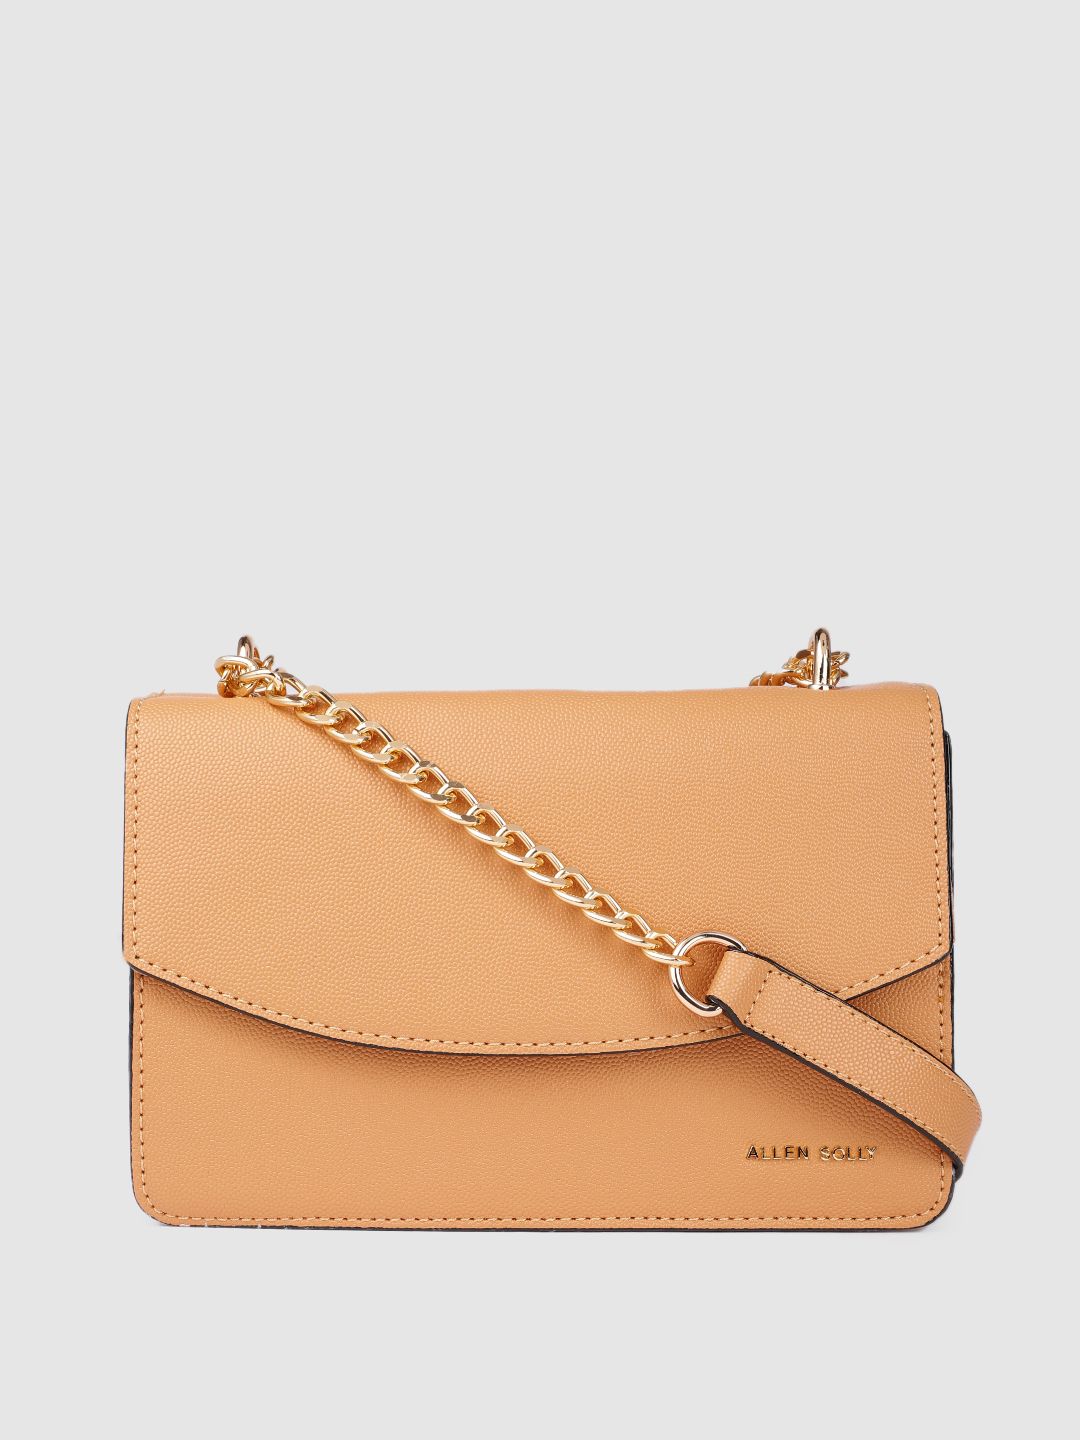 Allen Solly Nude-Coloured Solid Structured Sling Bag Price in India